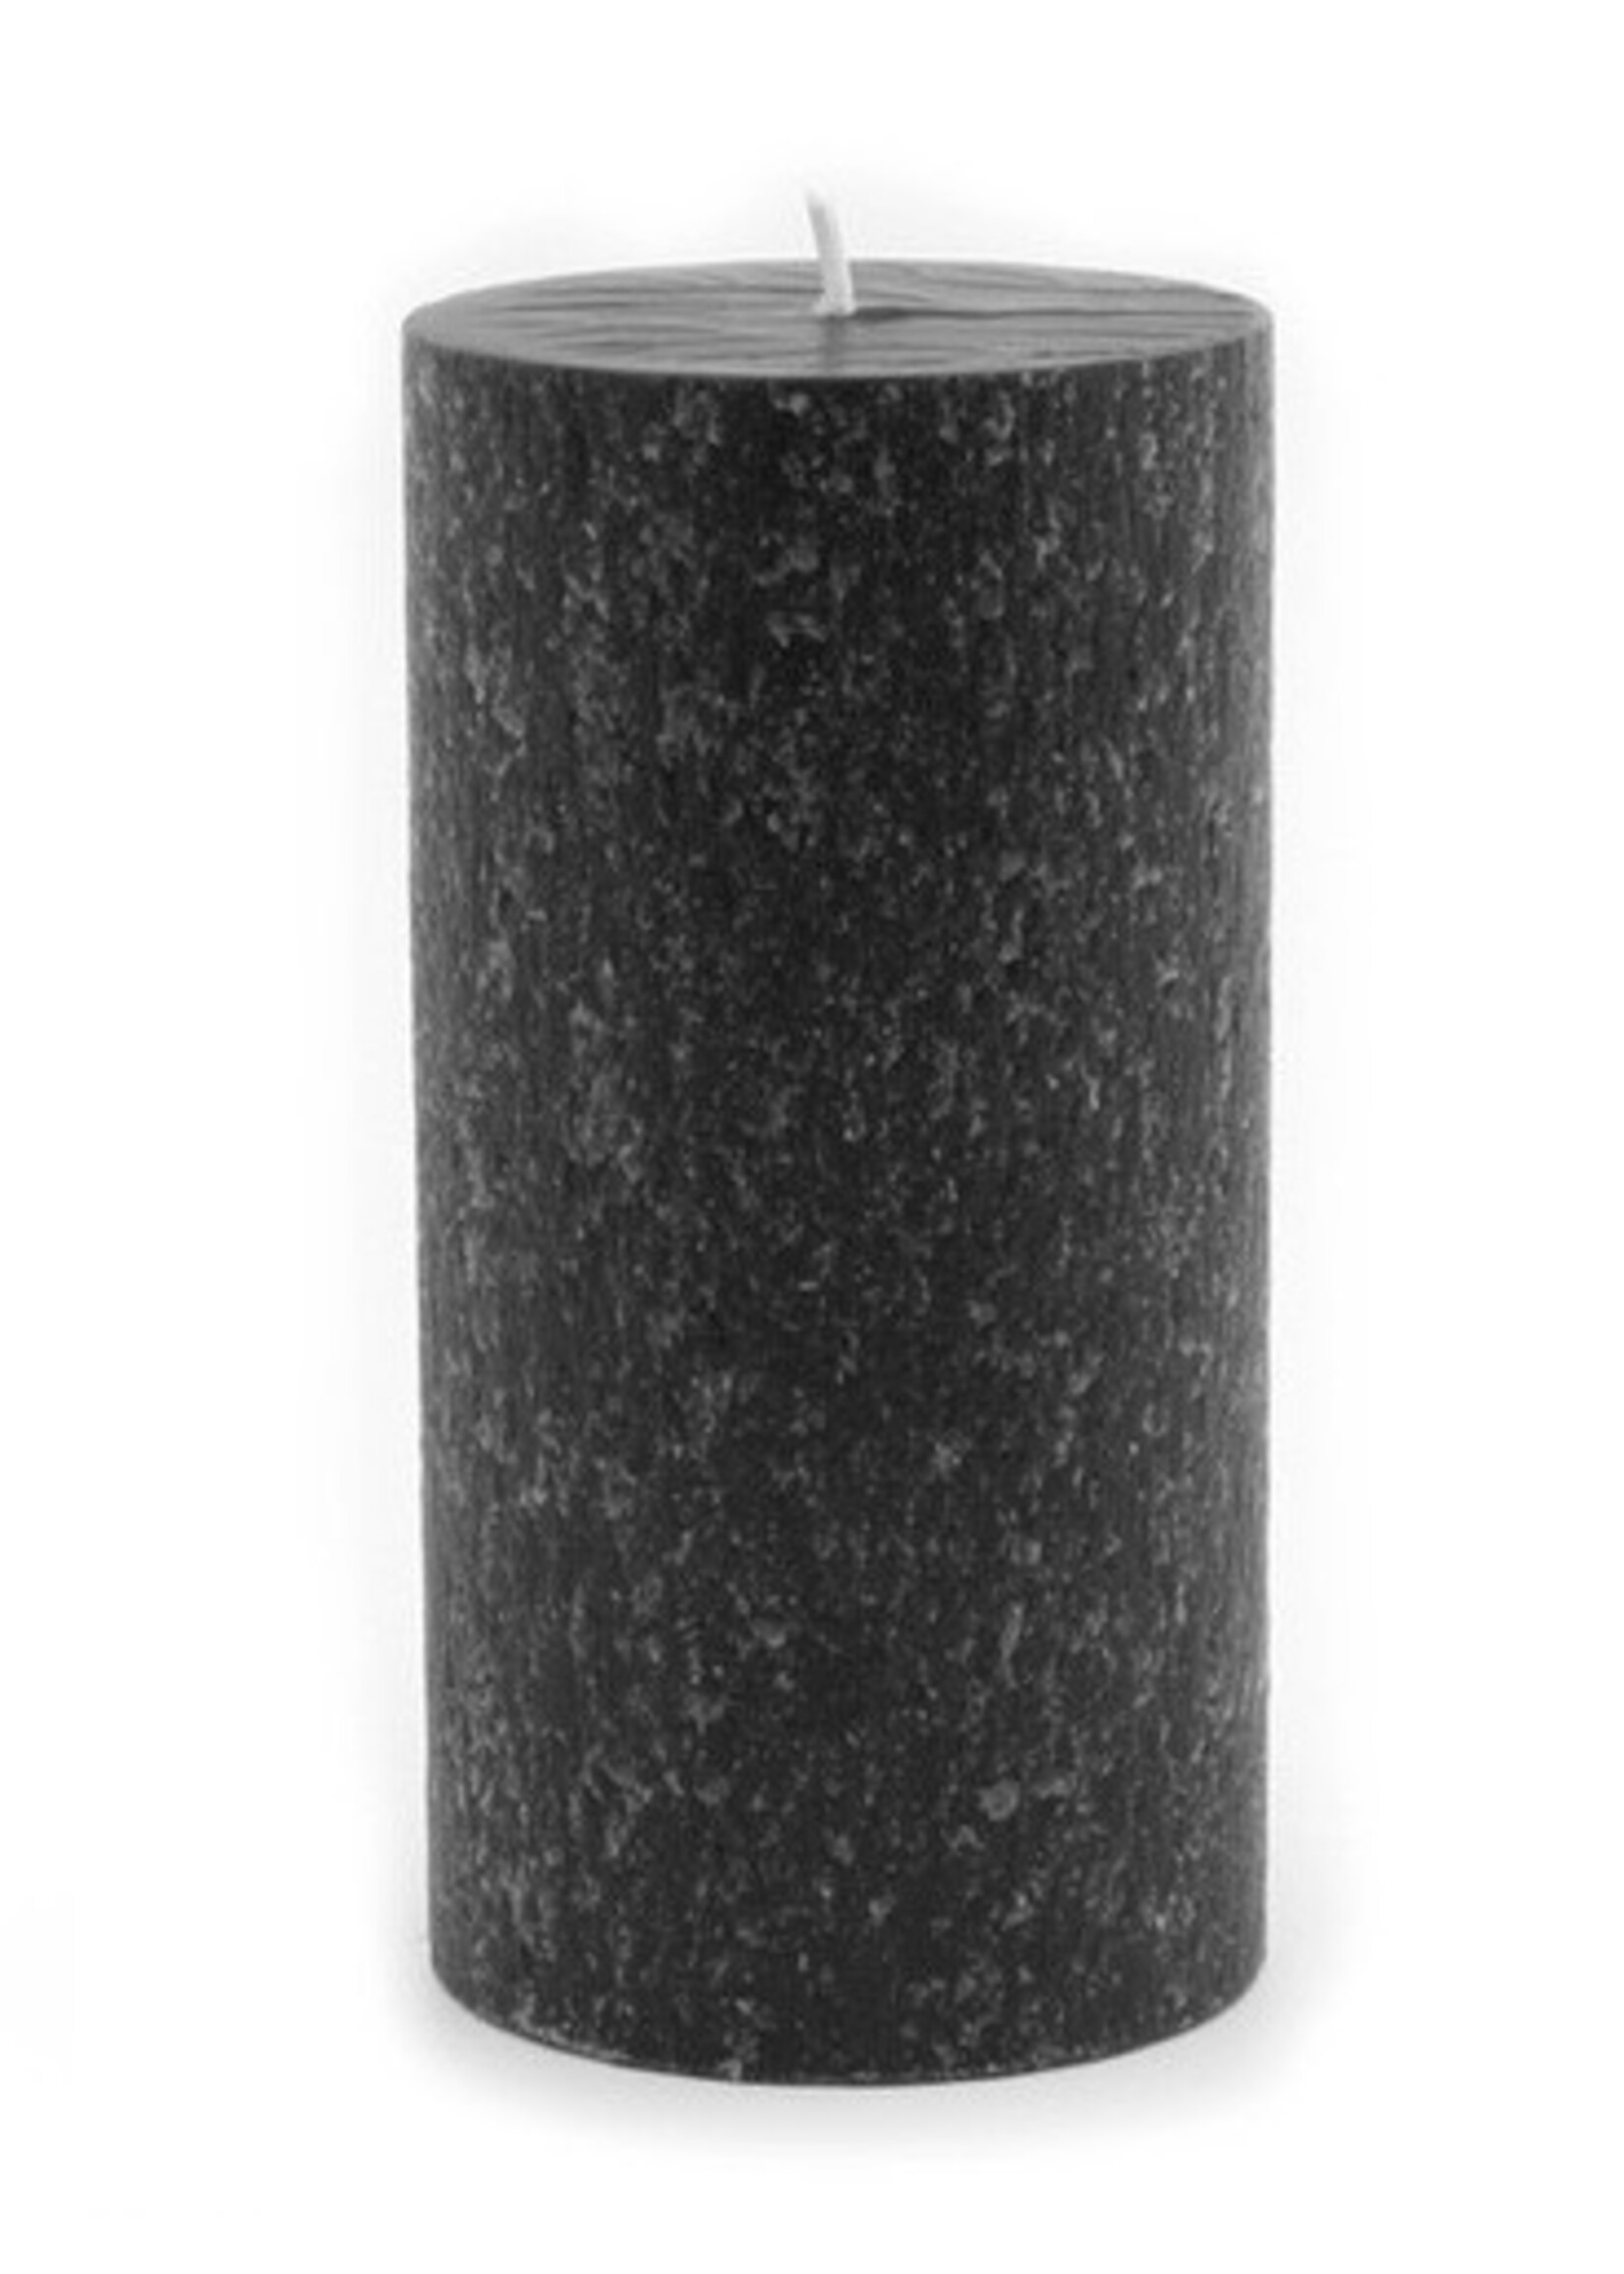 Root Candles Unscented pillar candles 6" "Timberline" by Root Candles